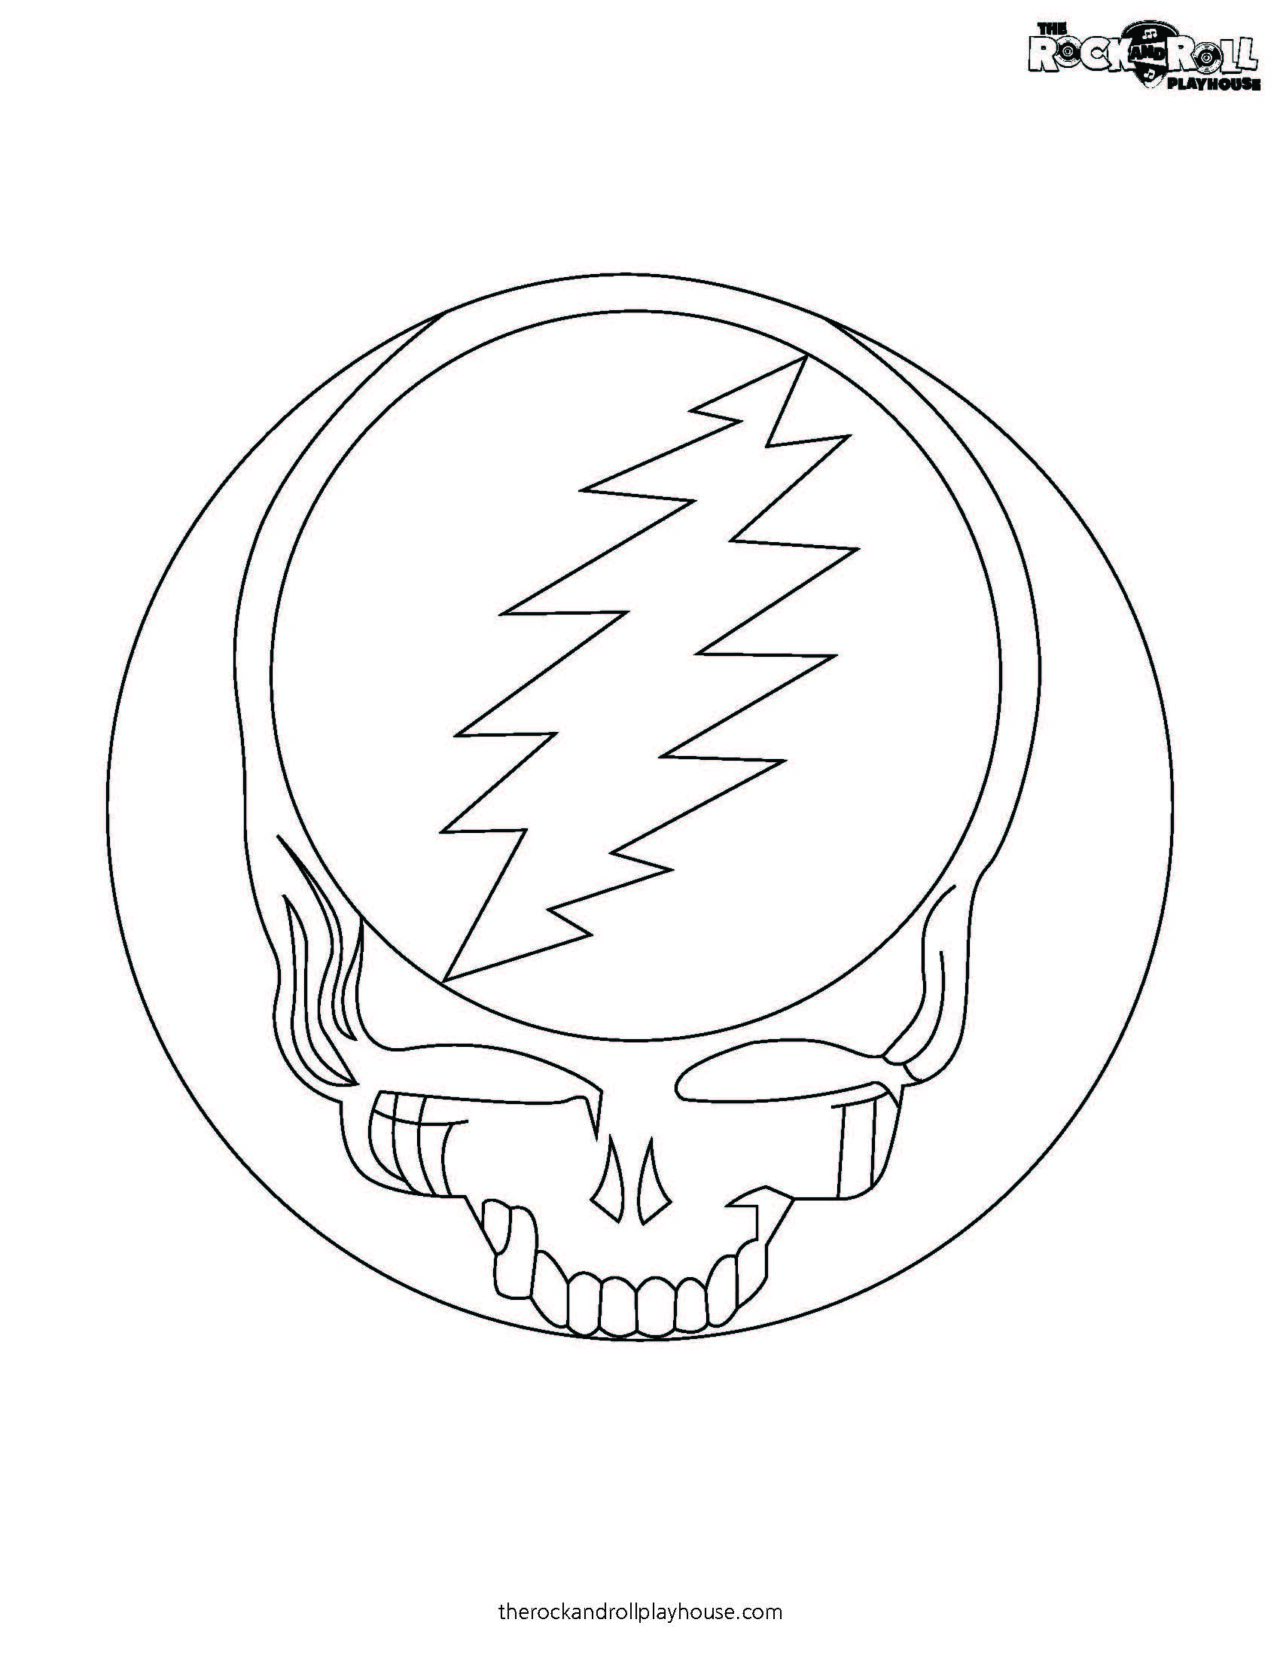 Grateful Dead Coloring | The Rock and Roll Playhouse